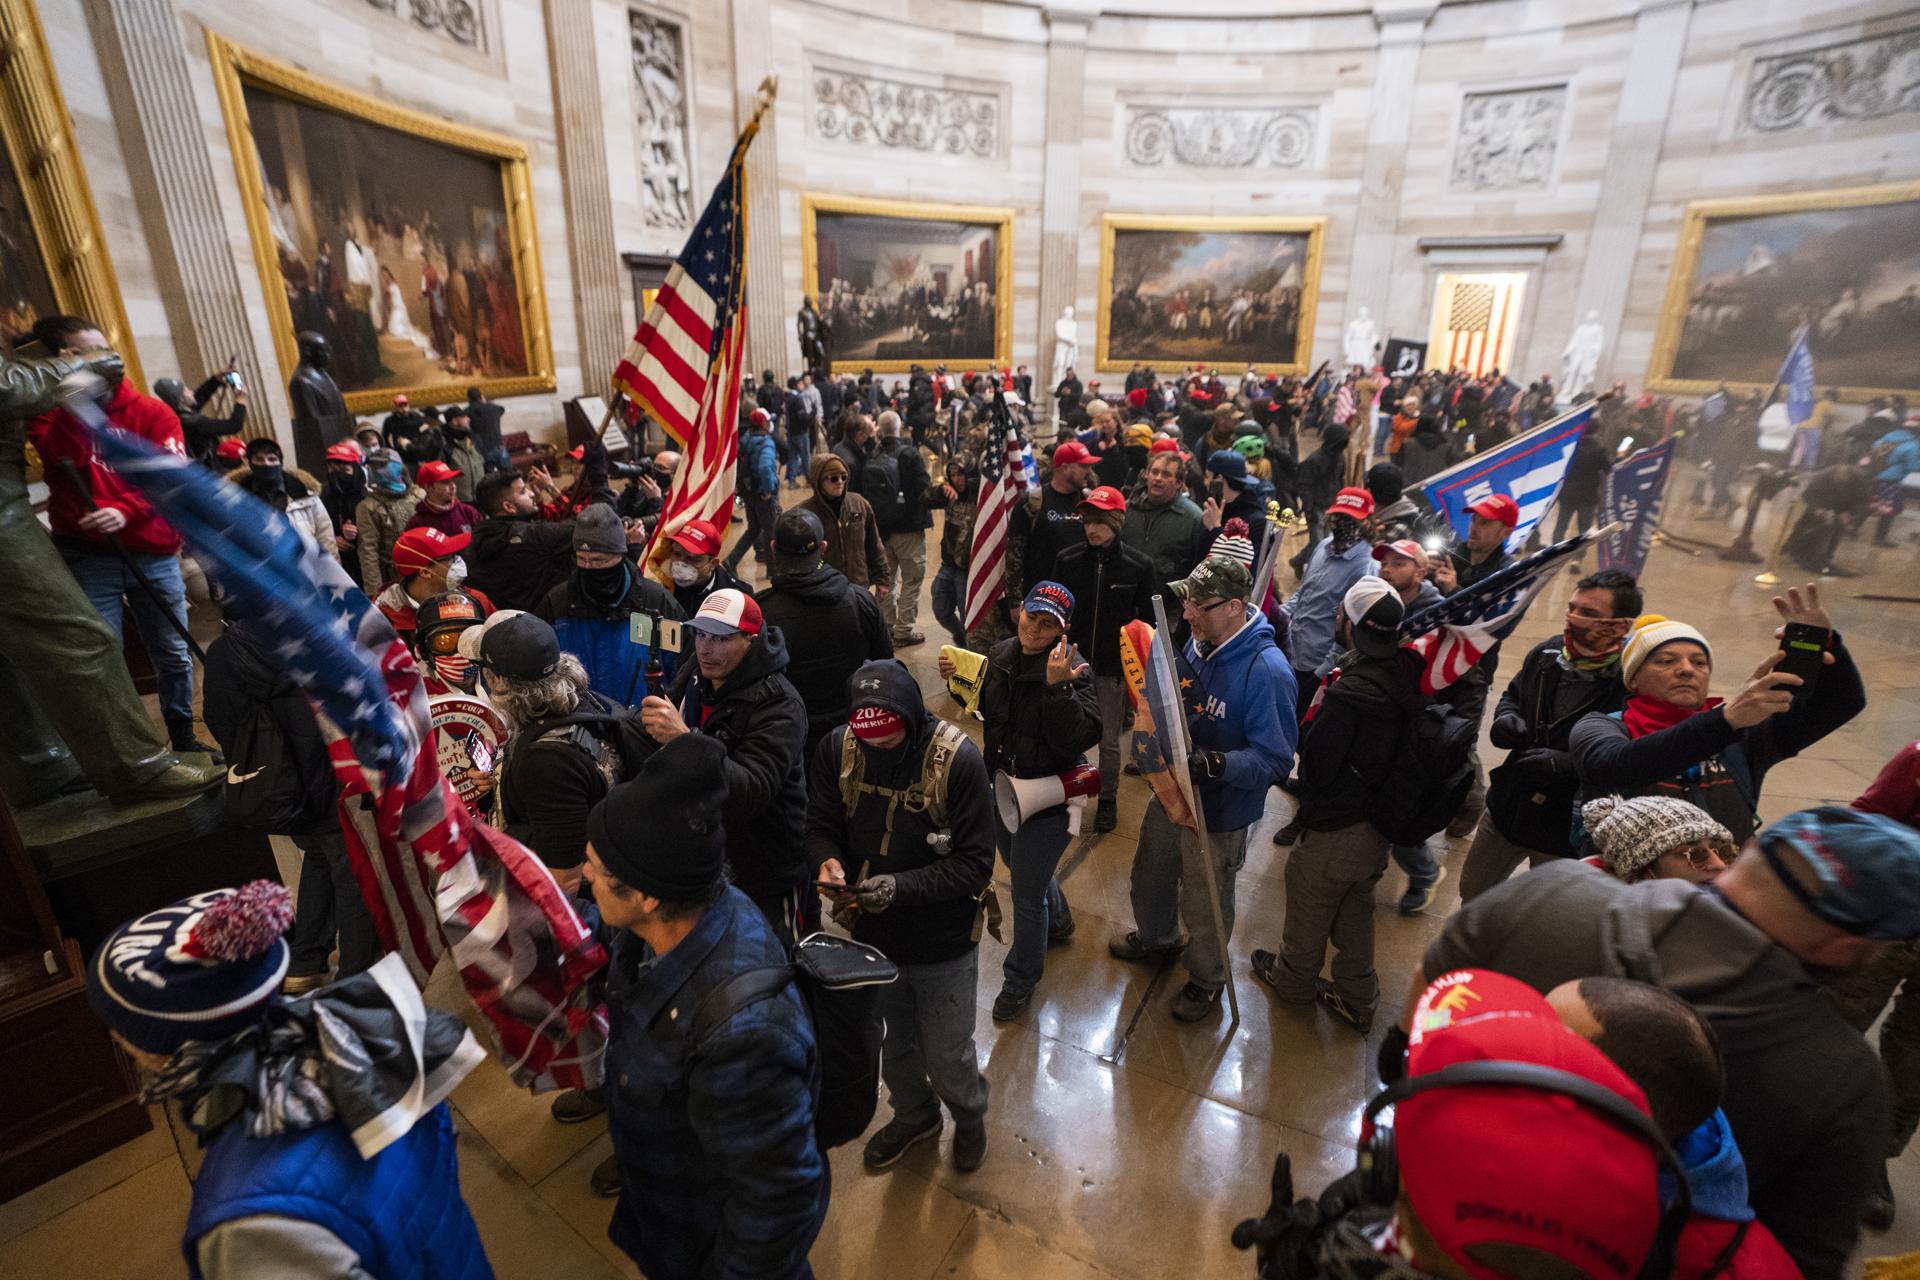 Supporters of former US President Donald Trump break into the Capitol, in Washington, on January 6, 2021. BLAZETRENDS/Jim Lo Scalzo